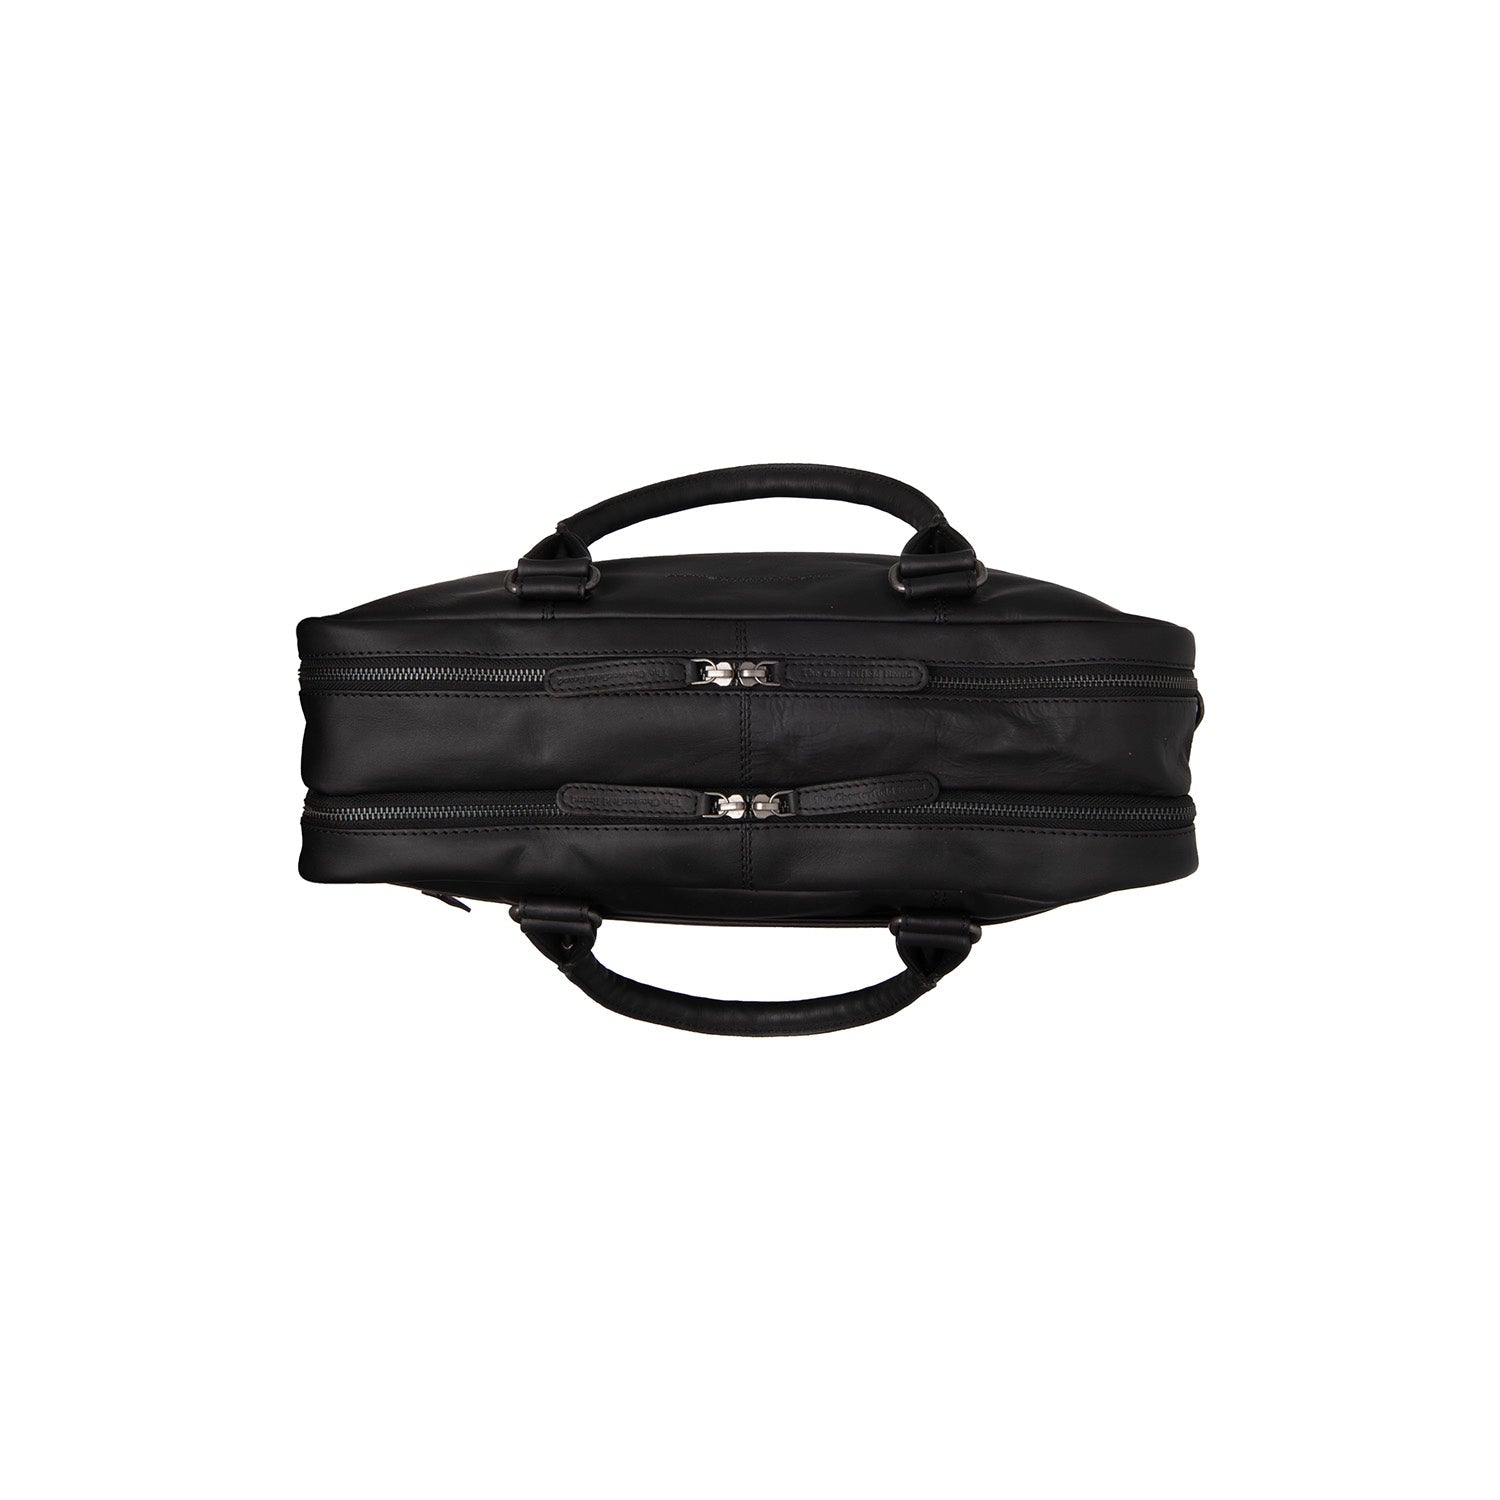 Leather Laptop Bag - The Chesterfield Brand Boston Black